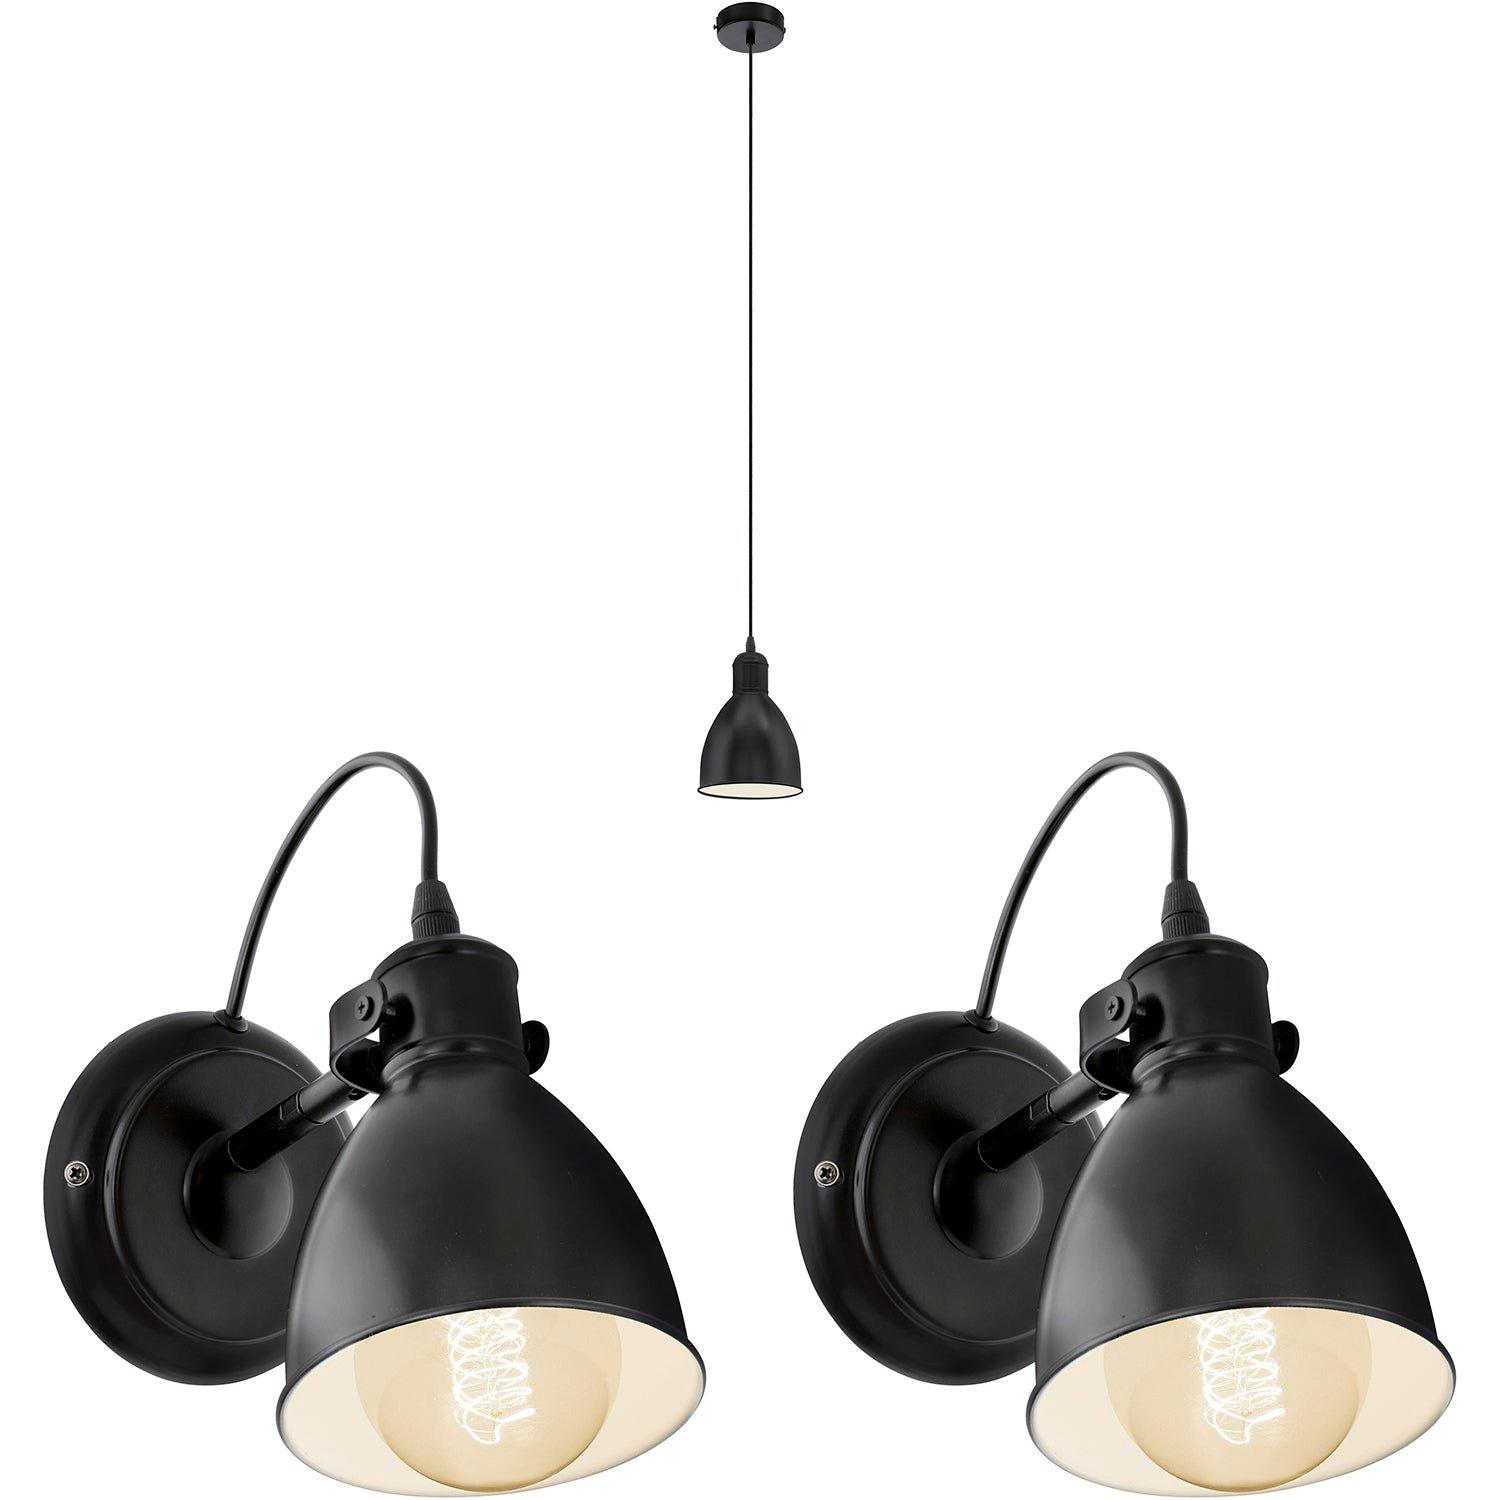 Ceiling Pendant Light & 2x Matching Wall Lights Black Industrial Lamp Shade